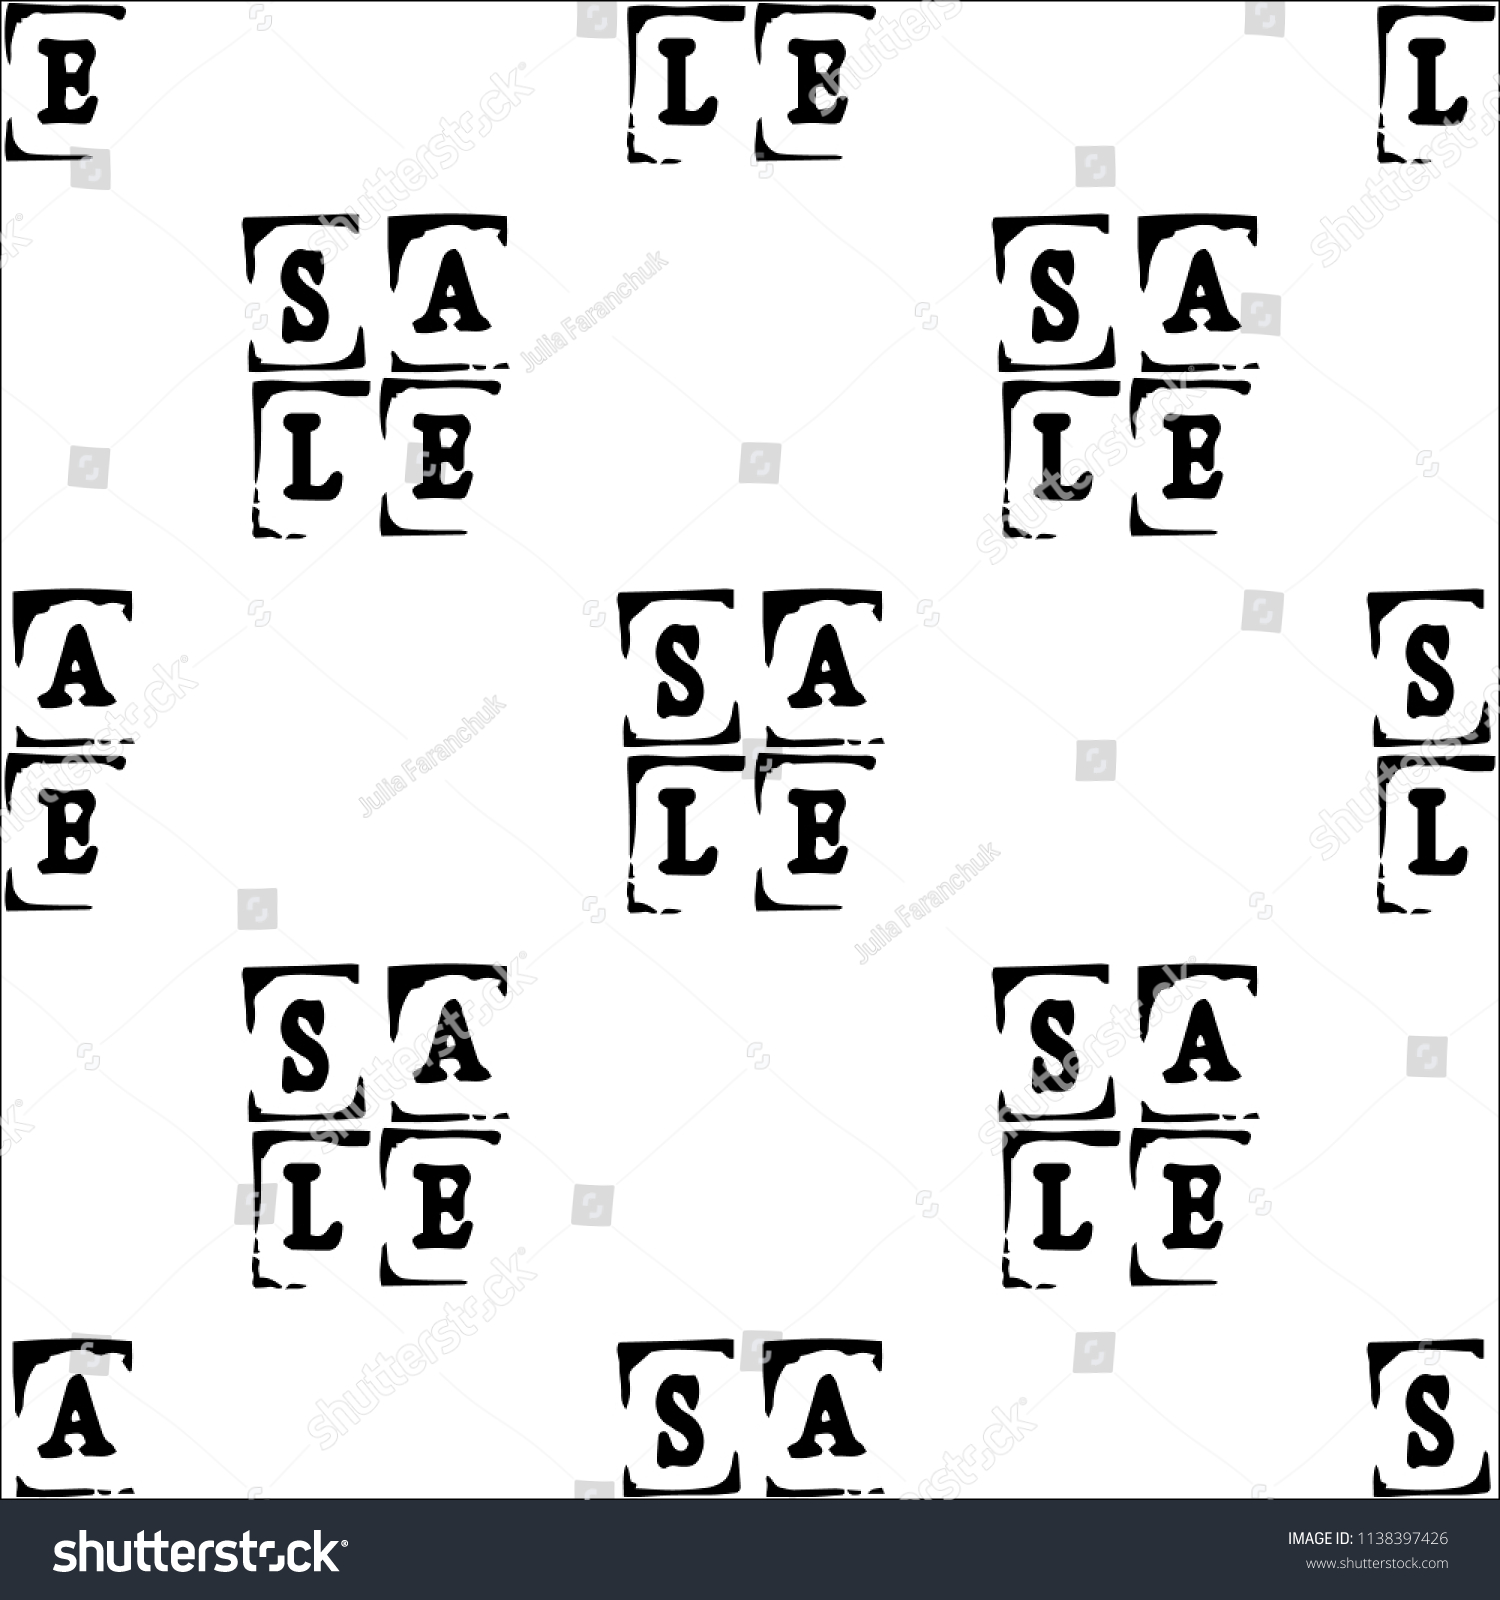 Sale. Event concept. Seamless Pattern. Letters of a word SALE - stamp. Black elements, white background #1138397426